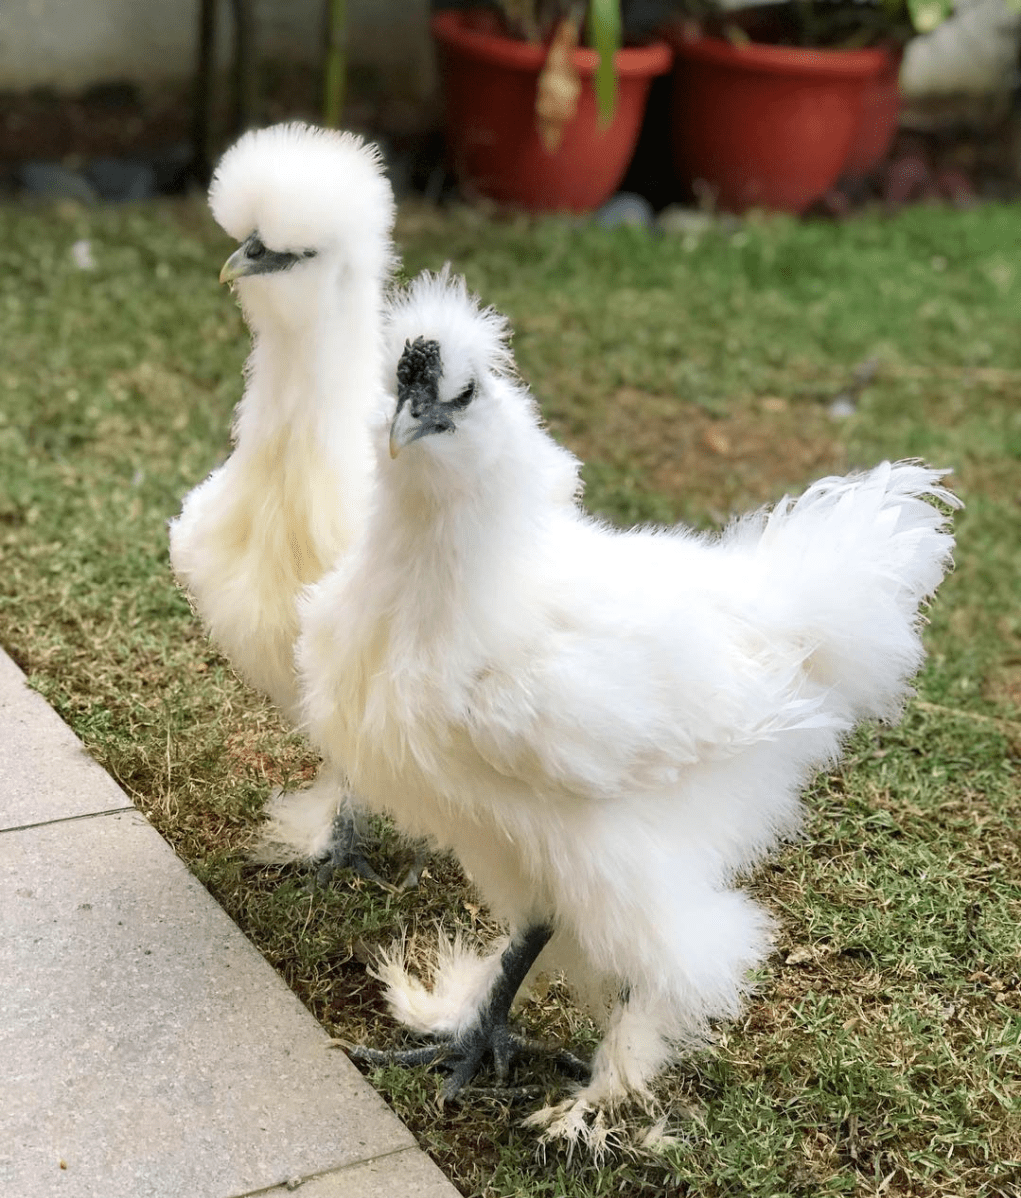 Legally Owned Pets In SG - Silkie Chicken